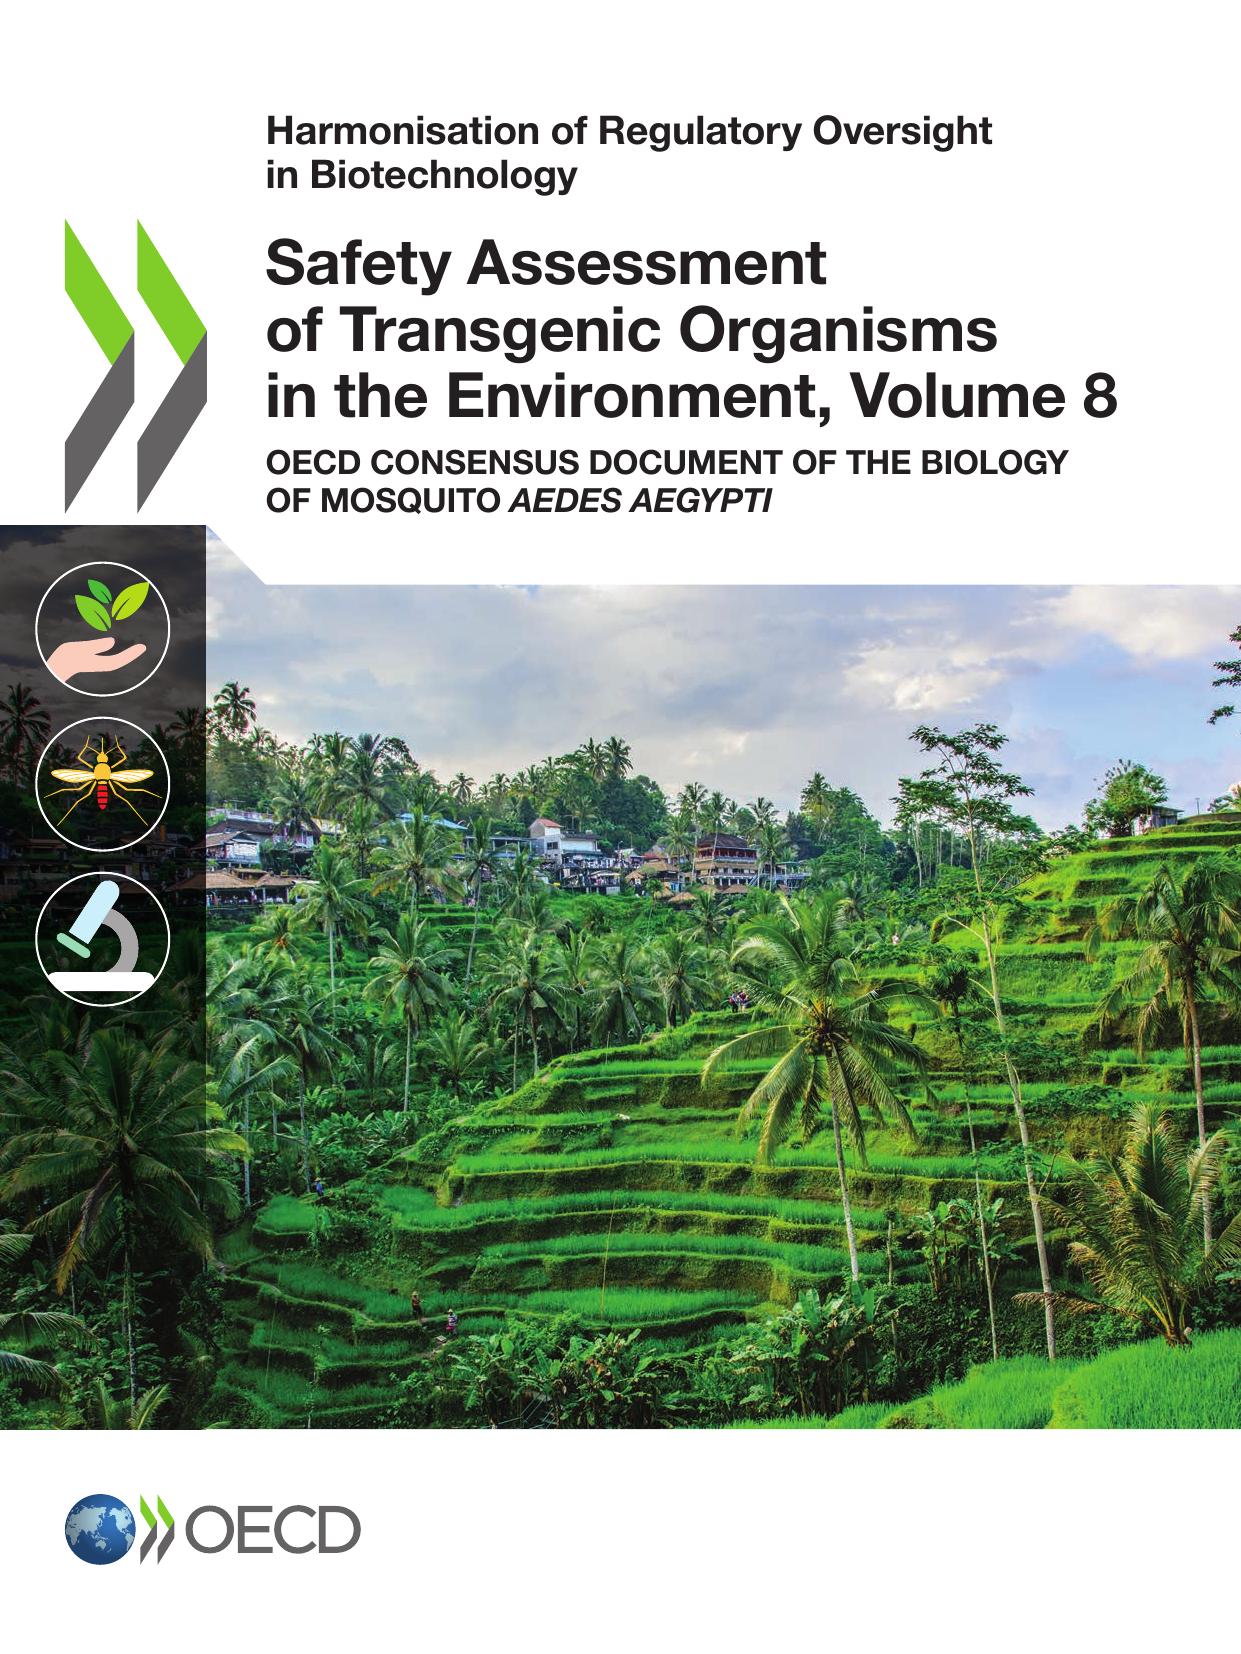 Safety Assessment
of Transgenic Organisms
in the Environment, 
Volume 8